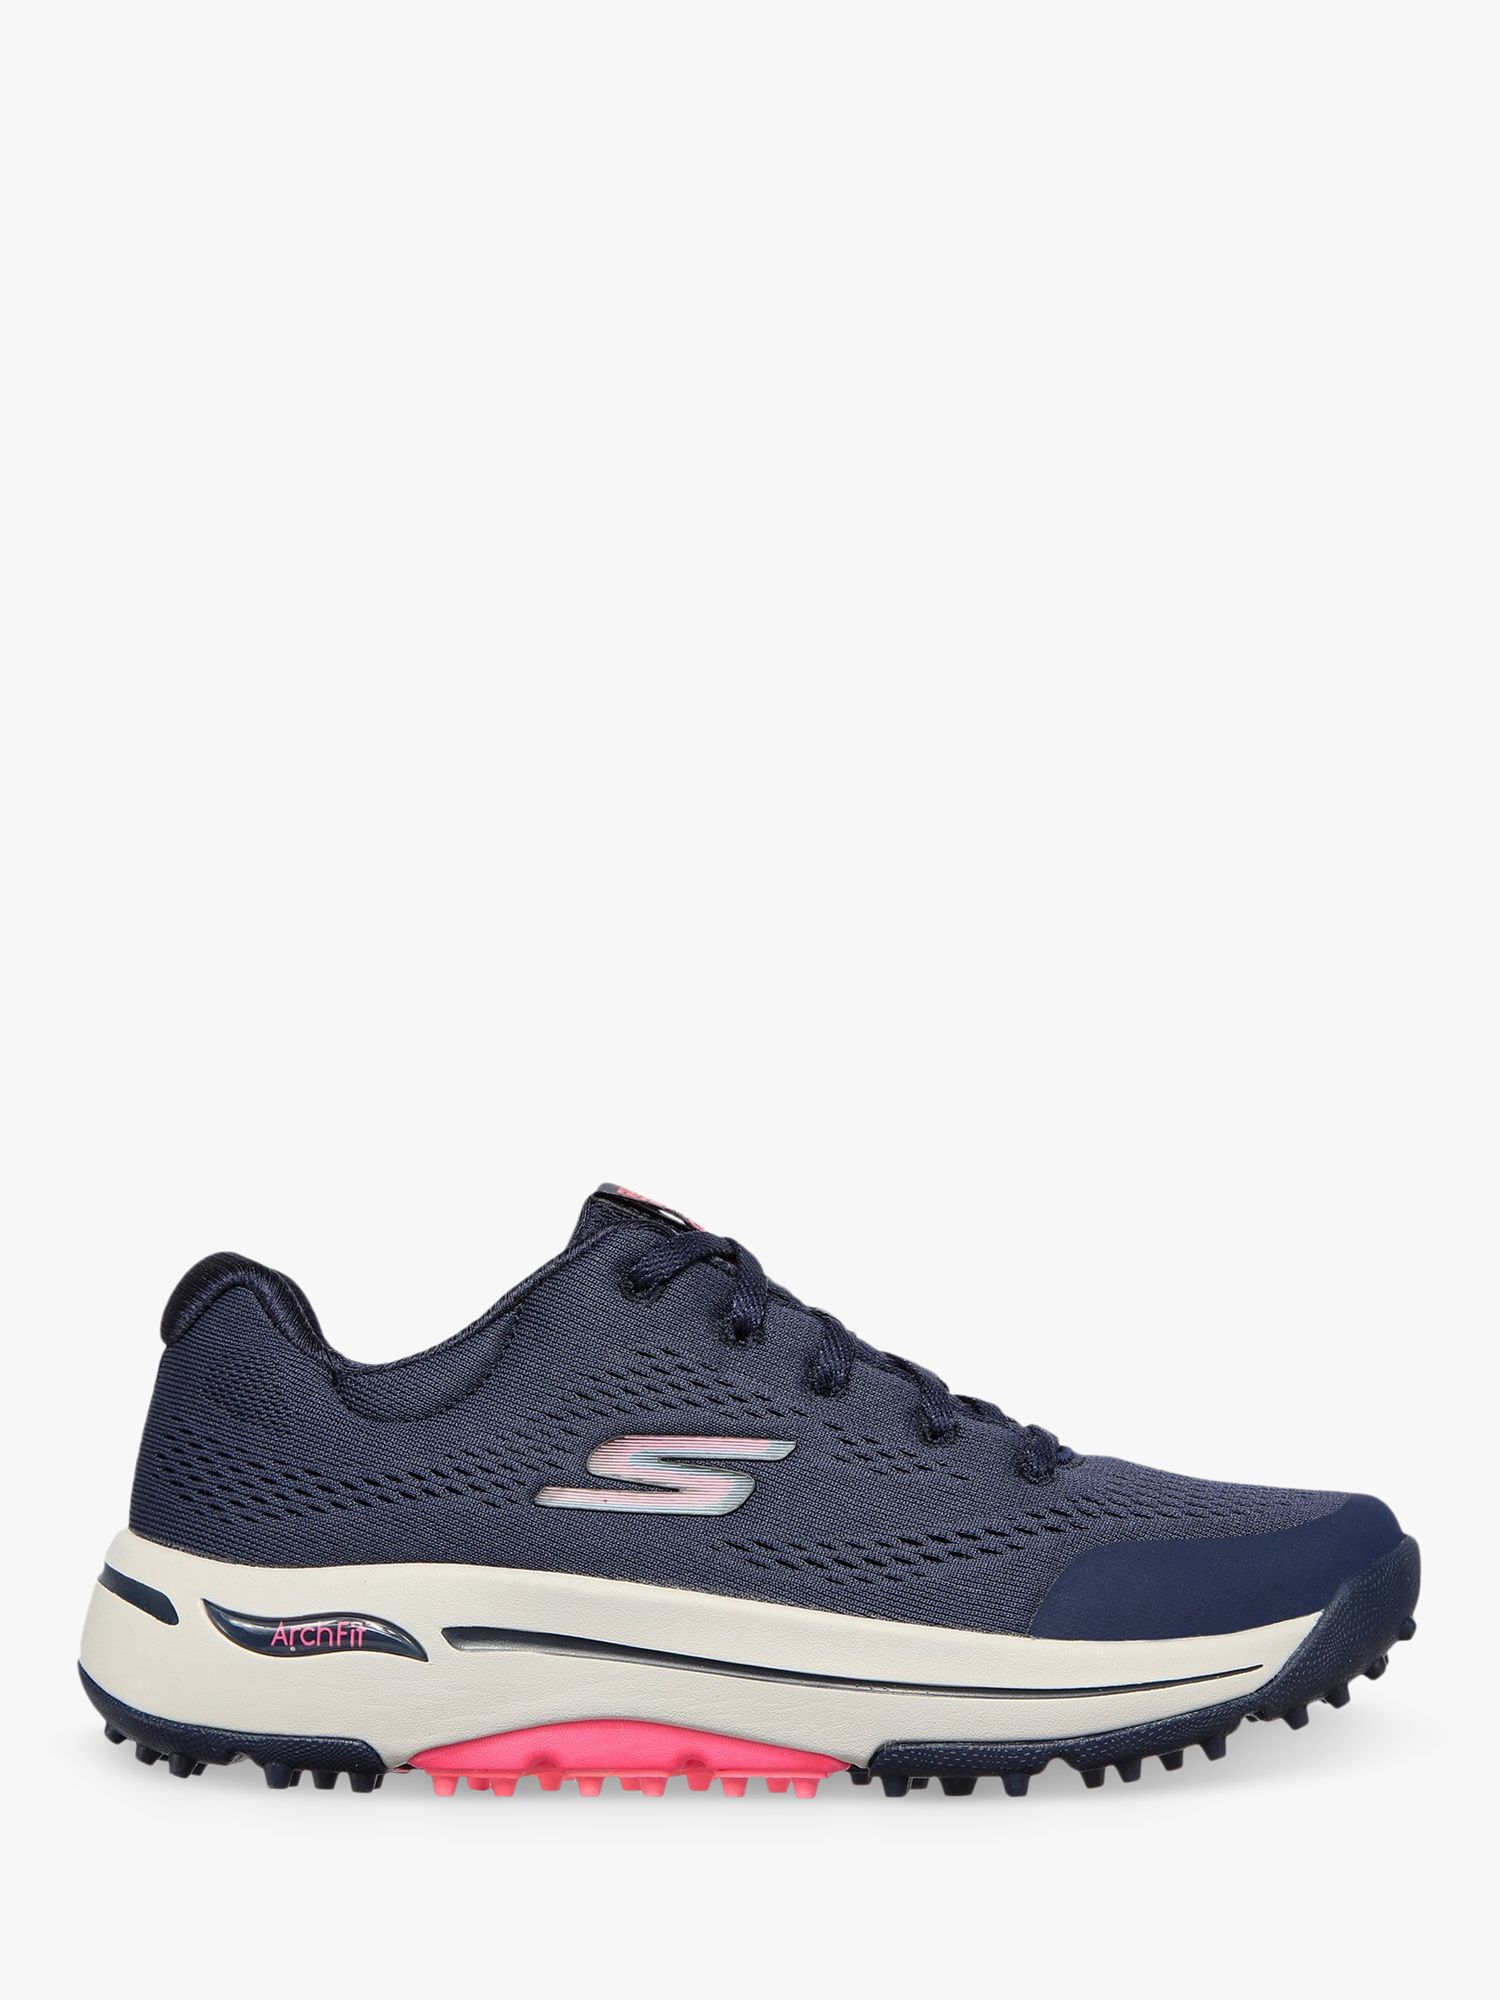 Skechers Go Golf Arch Fit Balance Golf Shoes, Navy at John Lewis & Partners